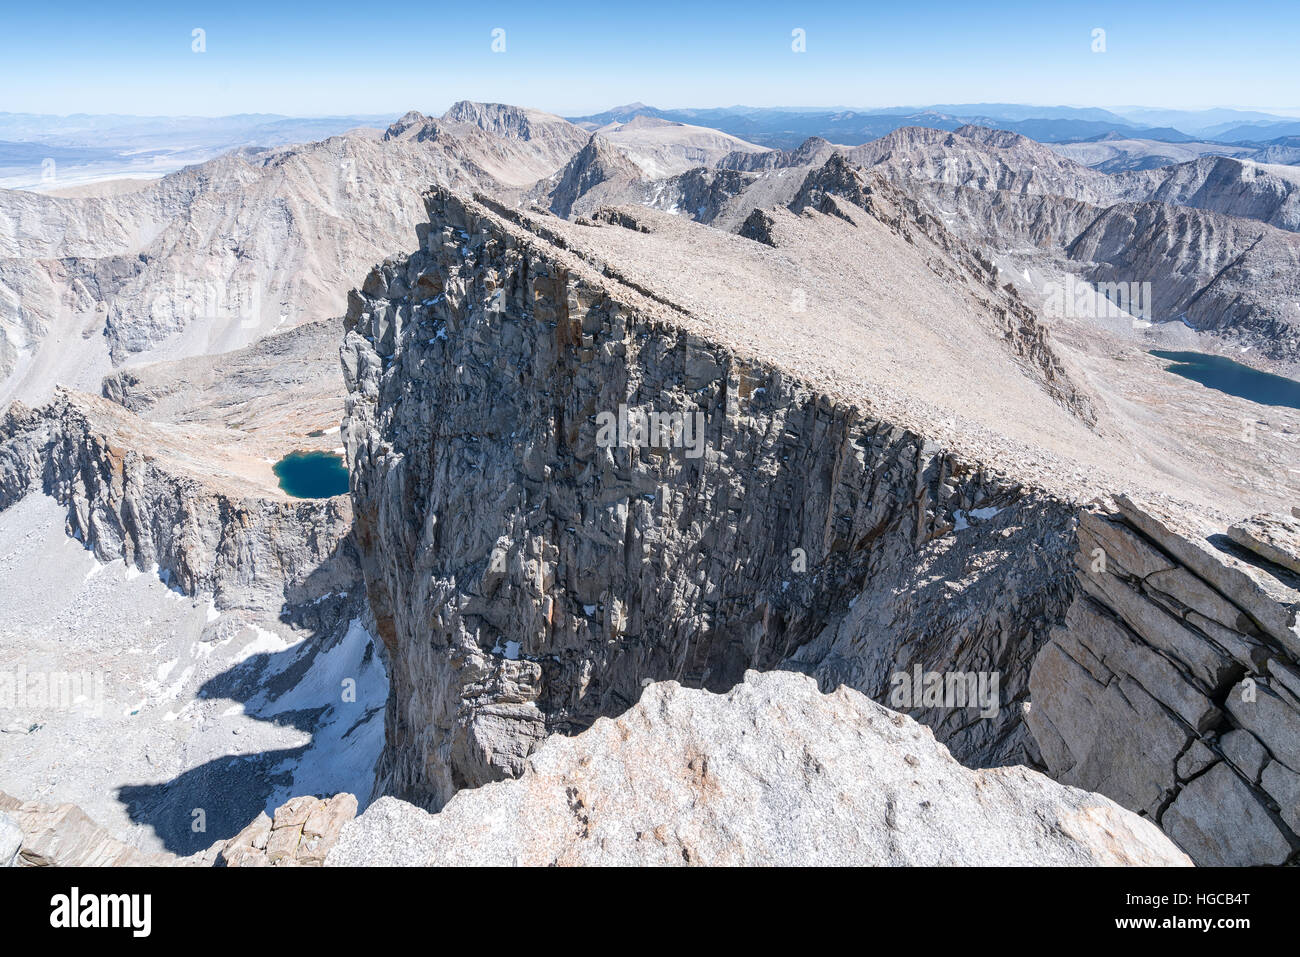 A view from the summit of Mount Whitney, Sequoia National Park, California, United States of America, North America Stock Photo